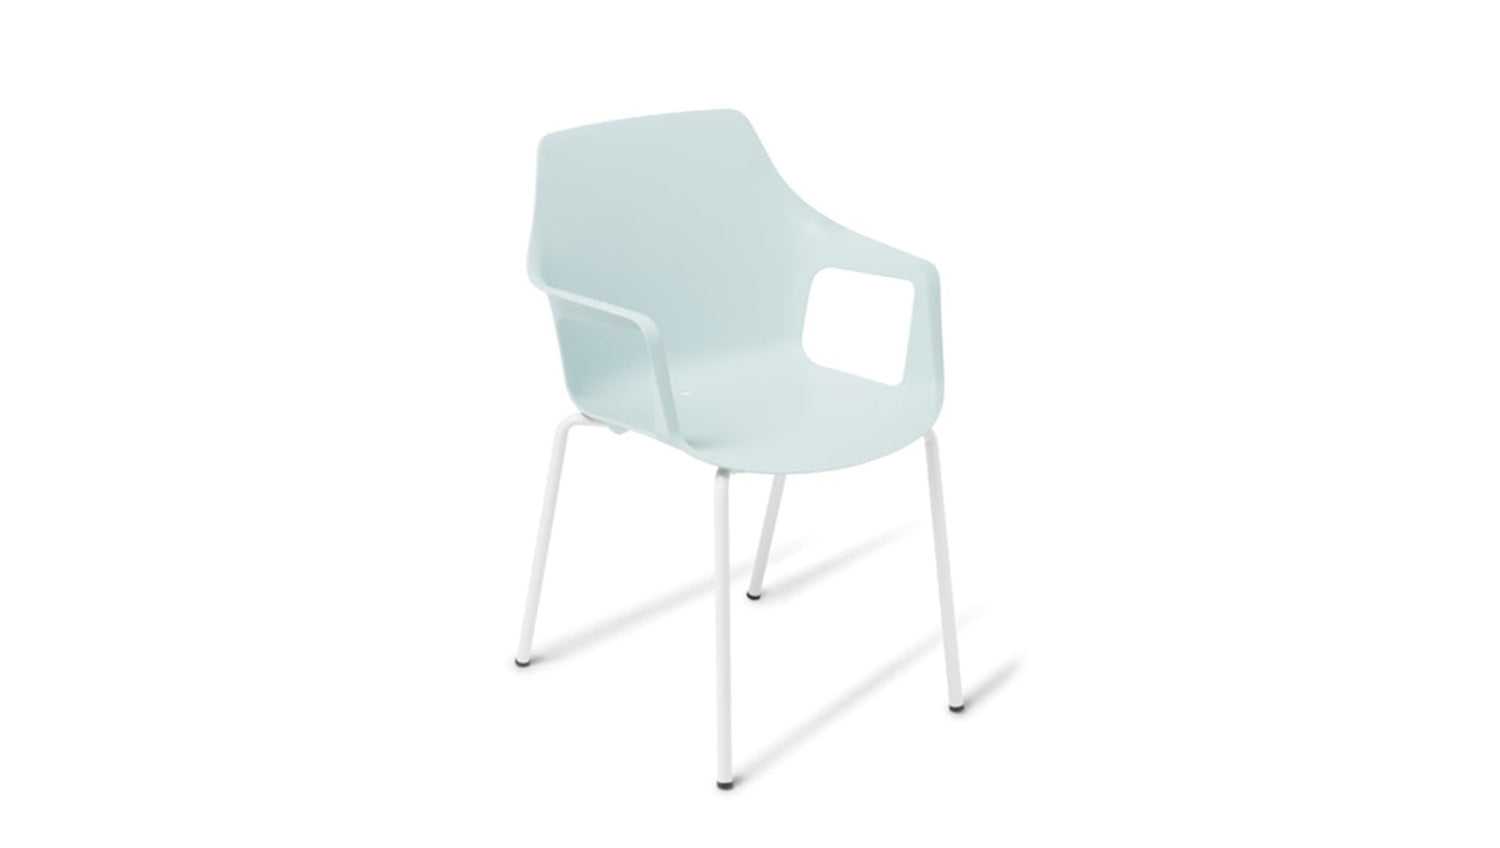 Seating 4 - leg / Light blue Coco Chair with Arms